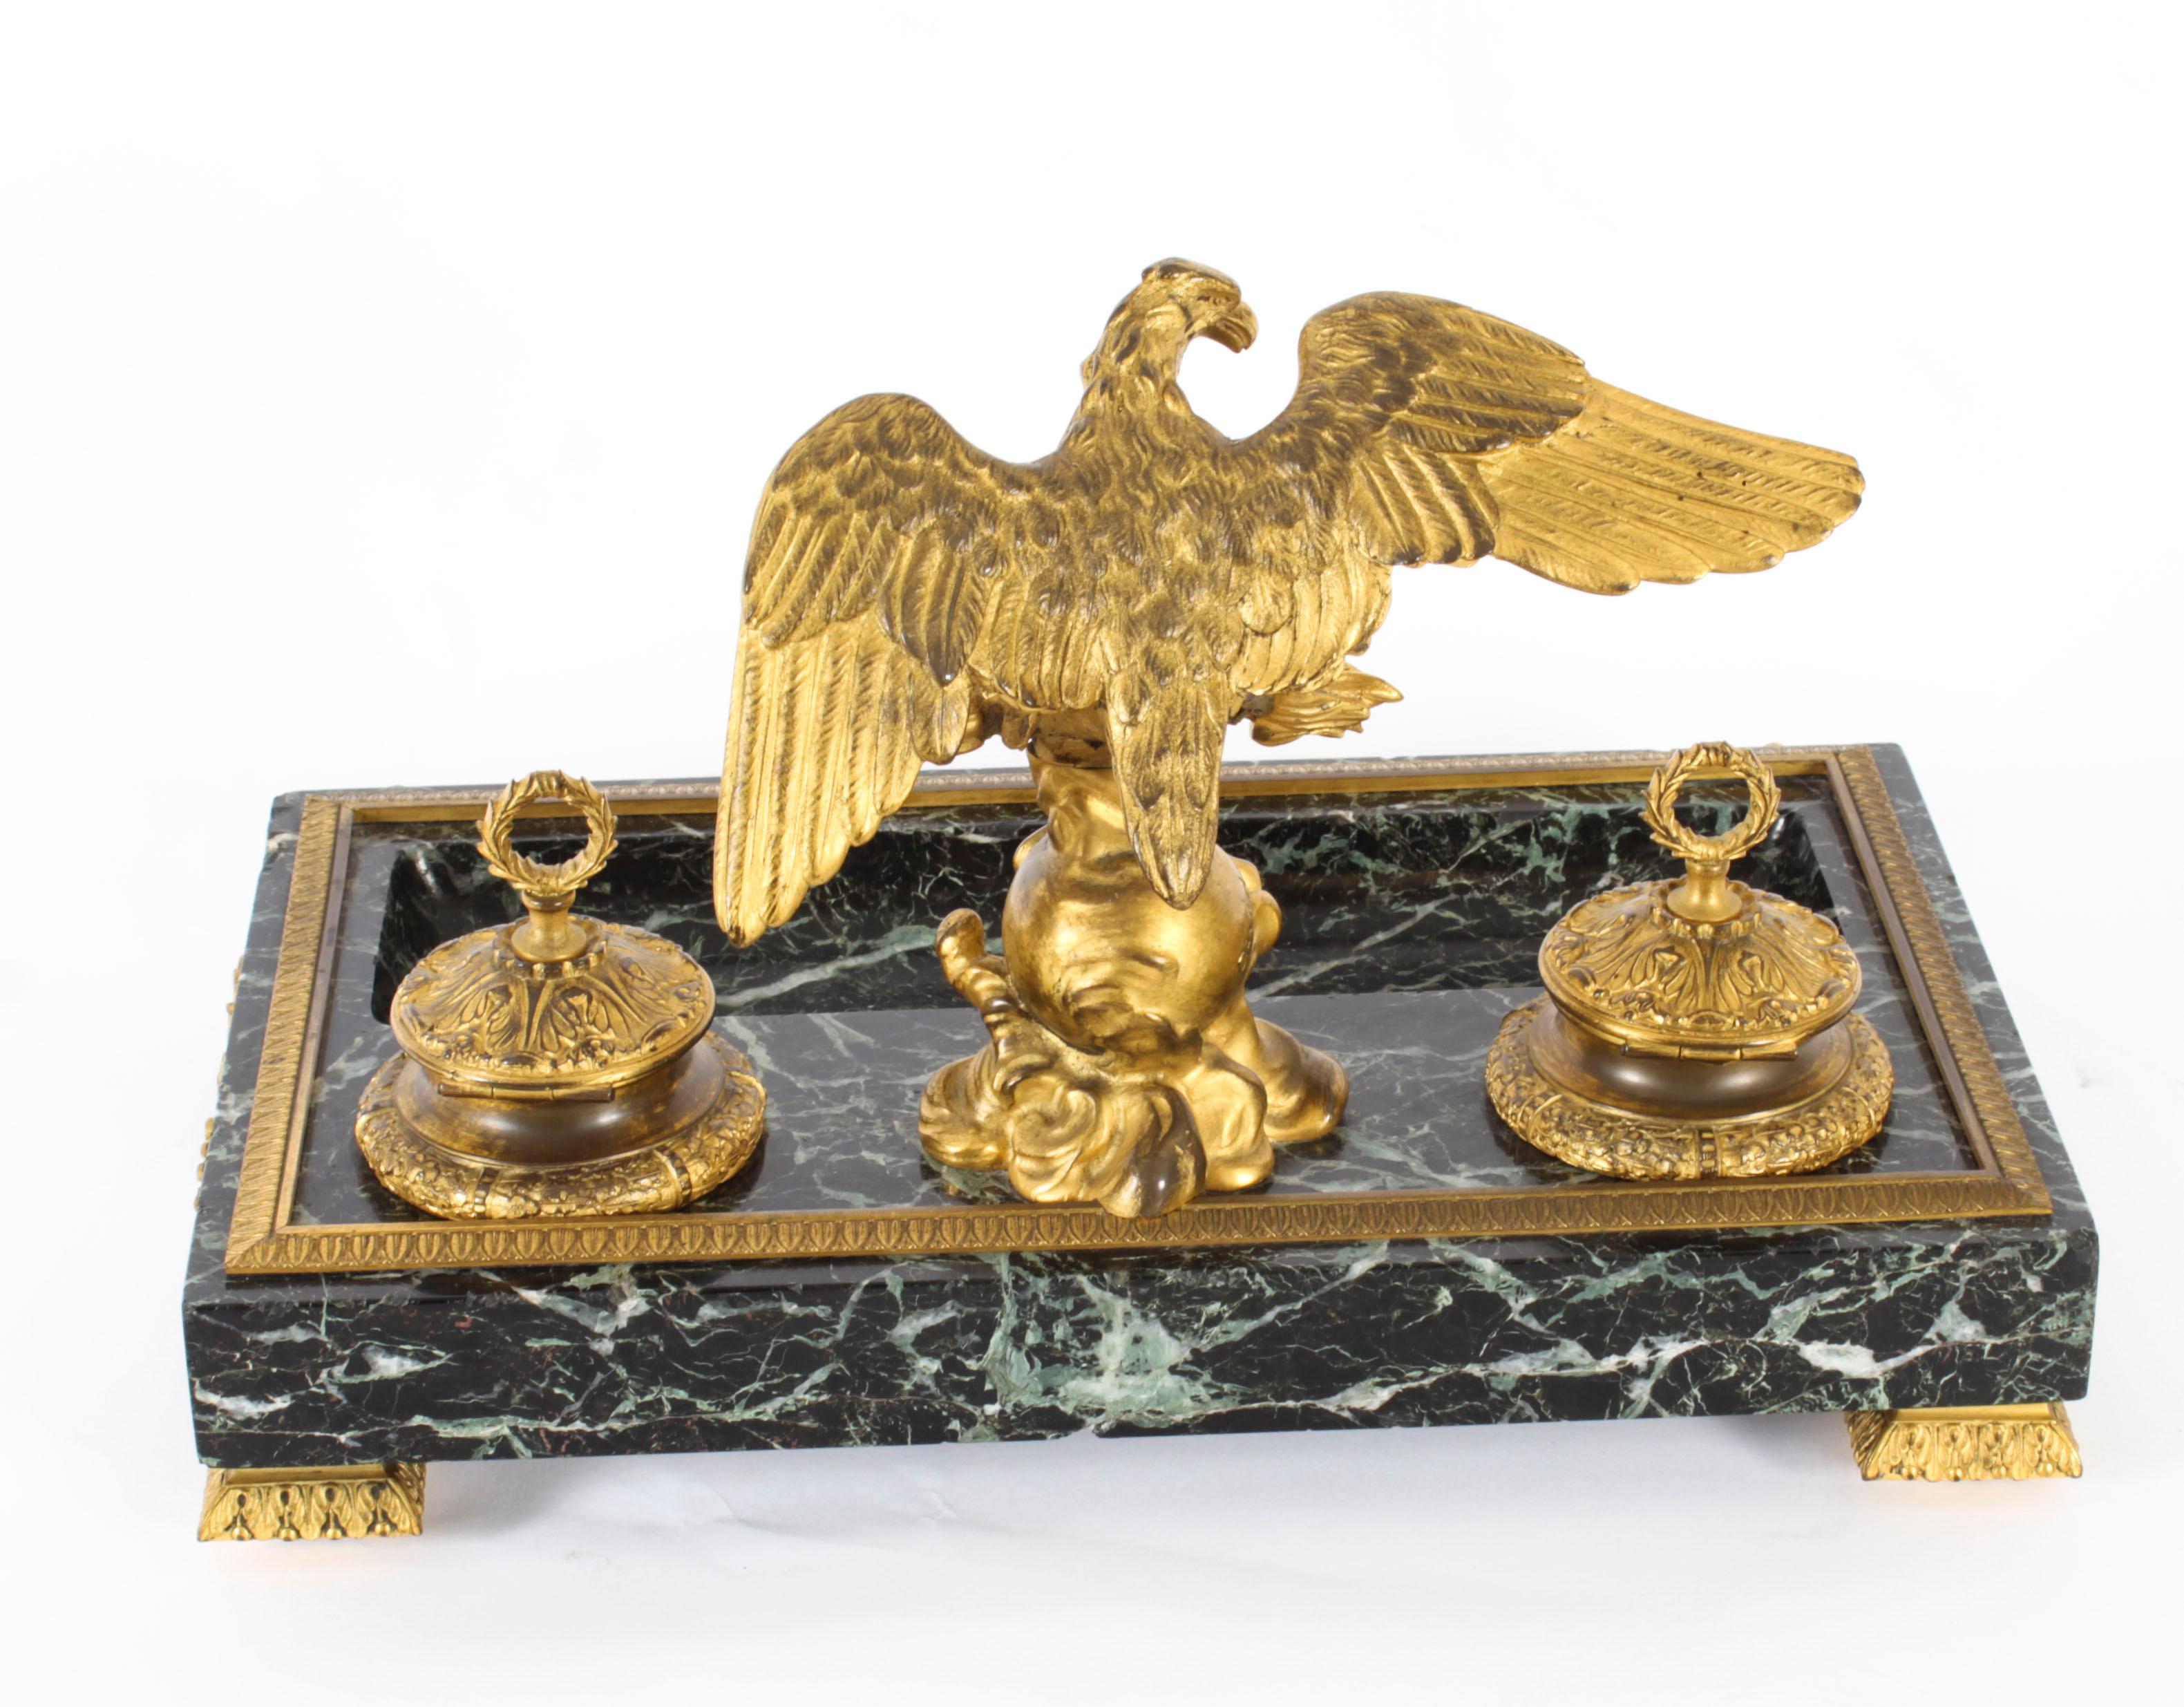 Antique French Ormolu & Marble Double Encrier Standish Inkstand 19th Century 8